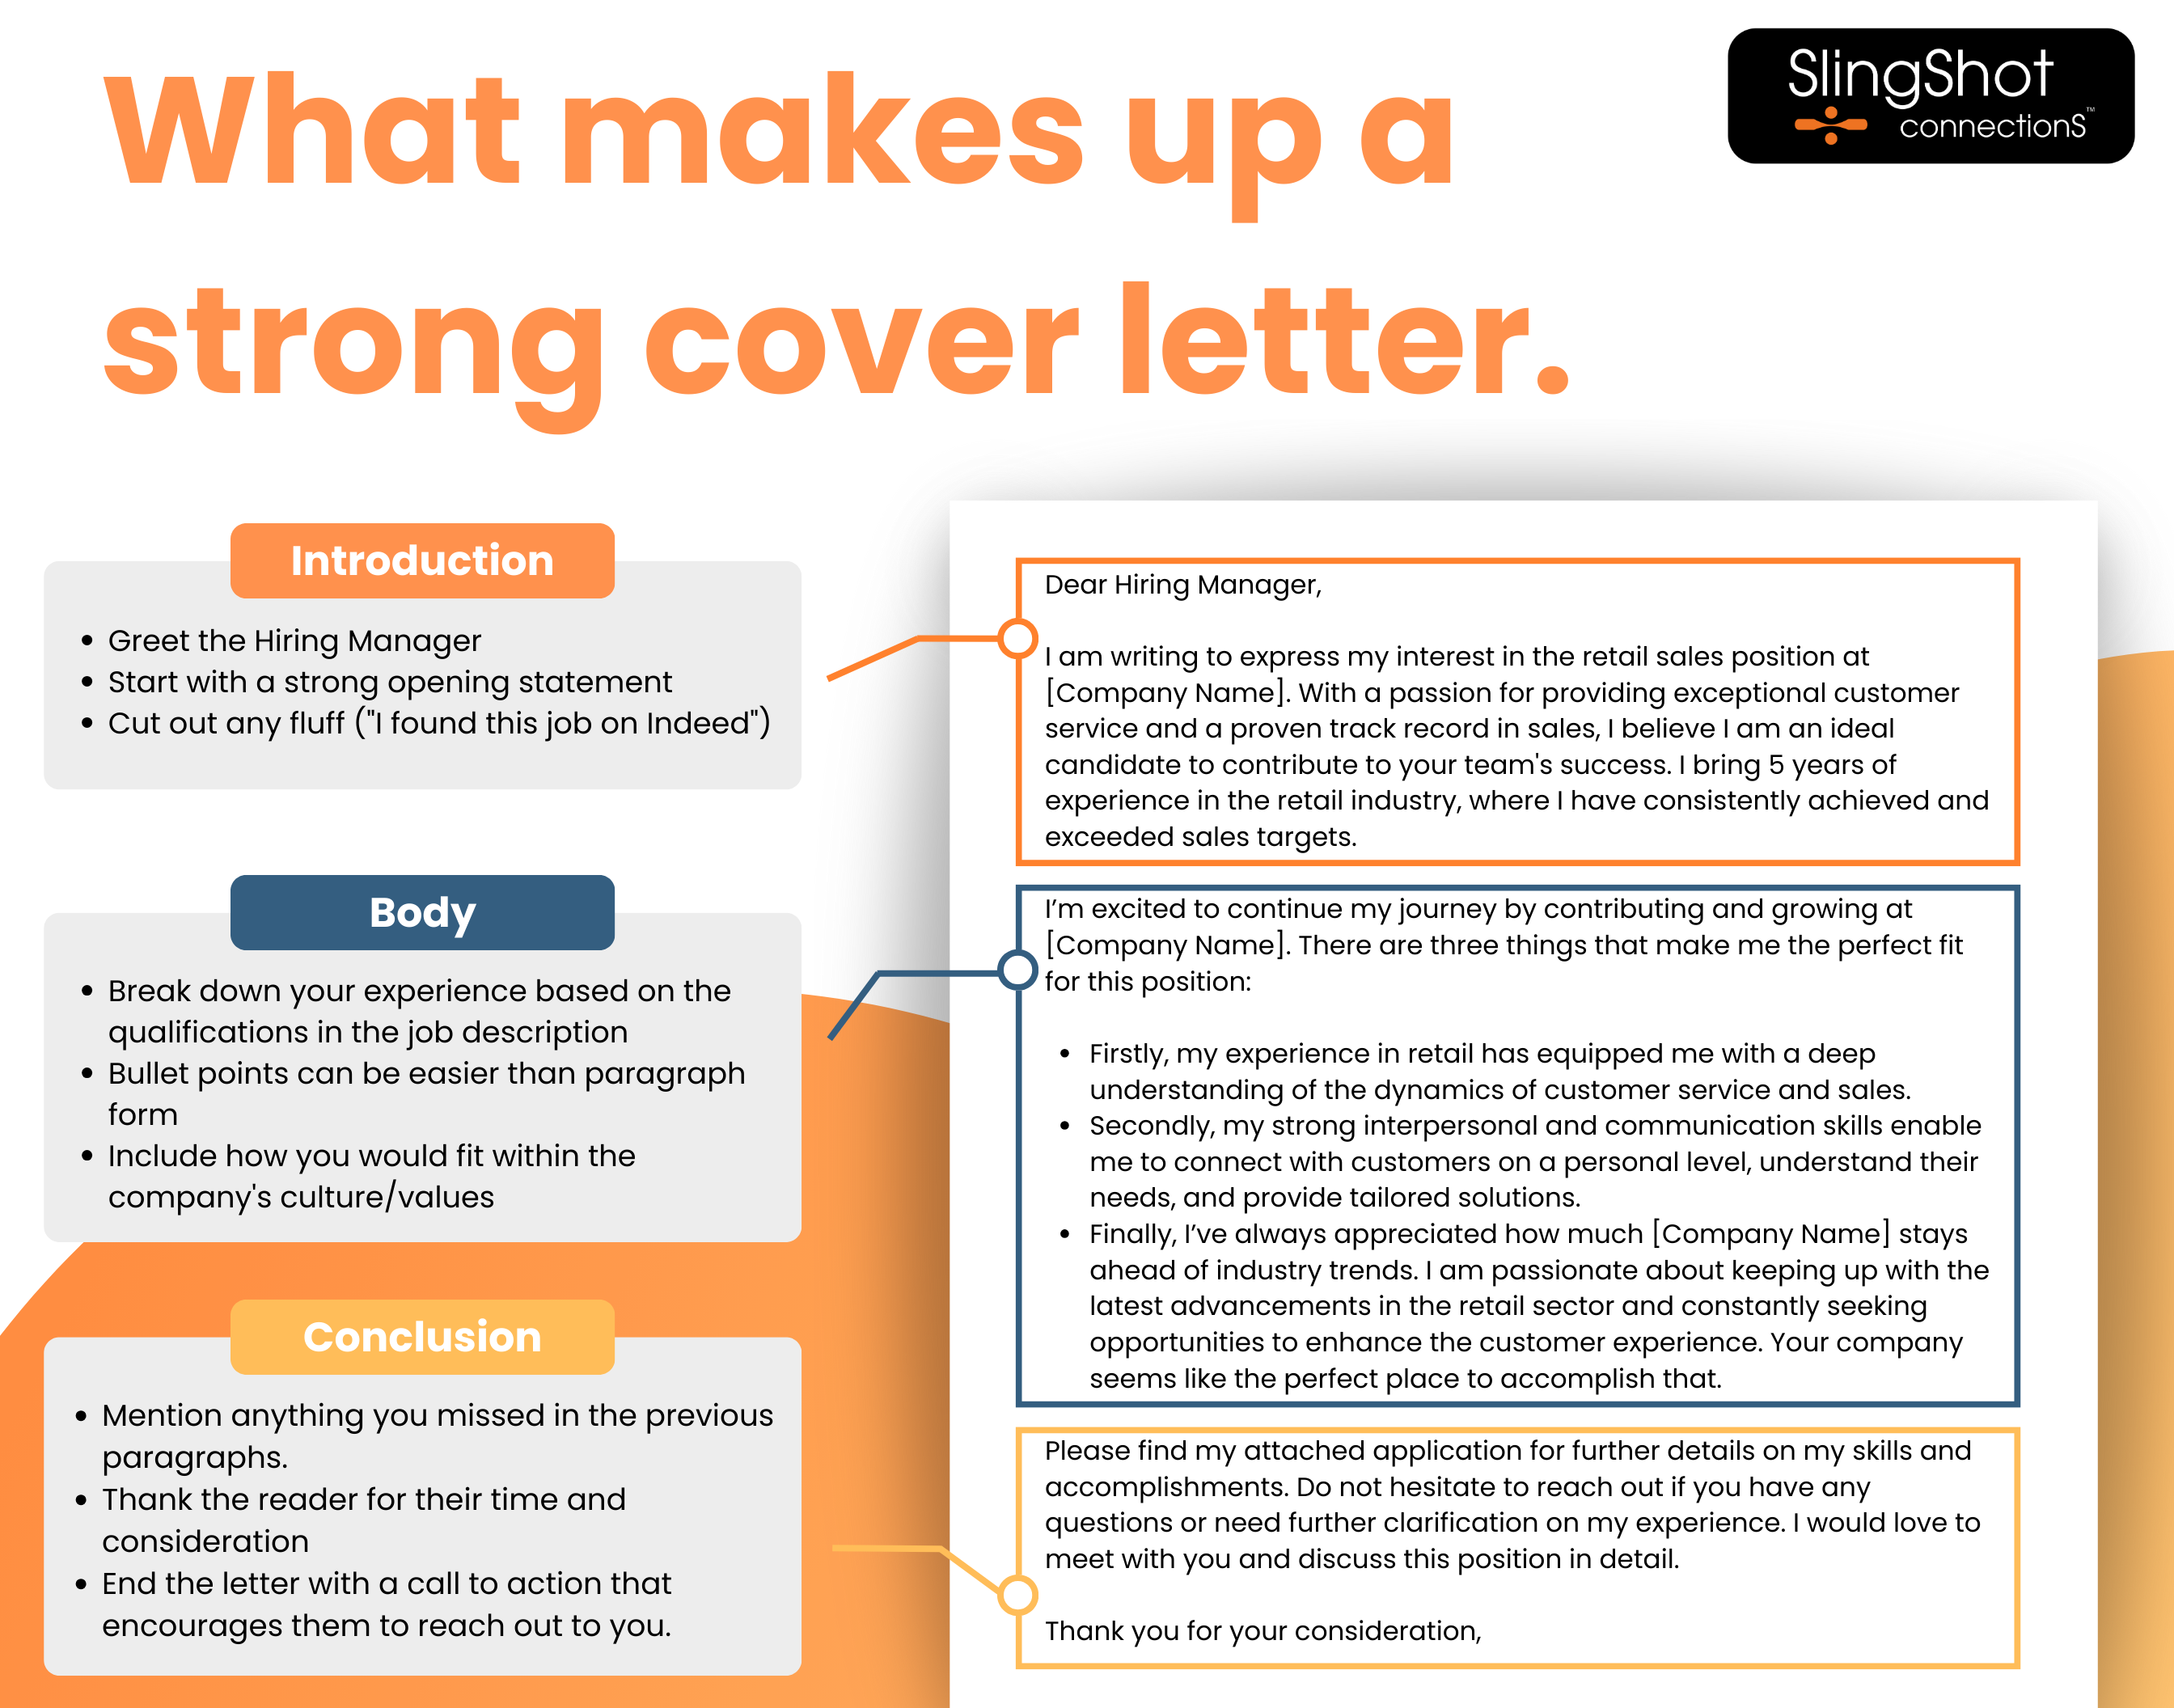 An infographic detailing all the parts that make up a good cover letter. Introduction, body, and conclusion.